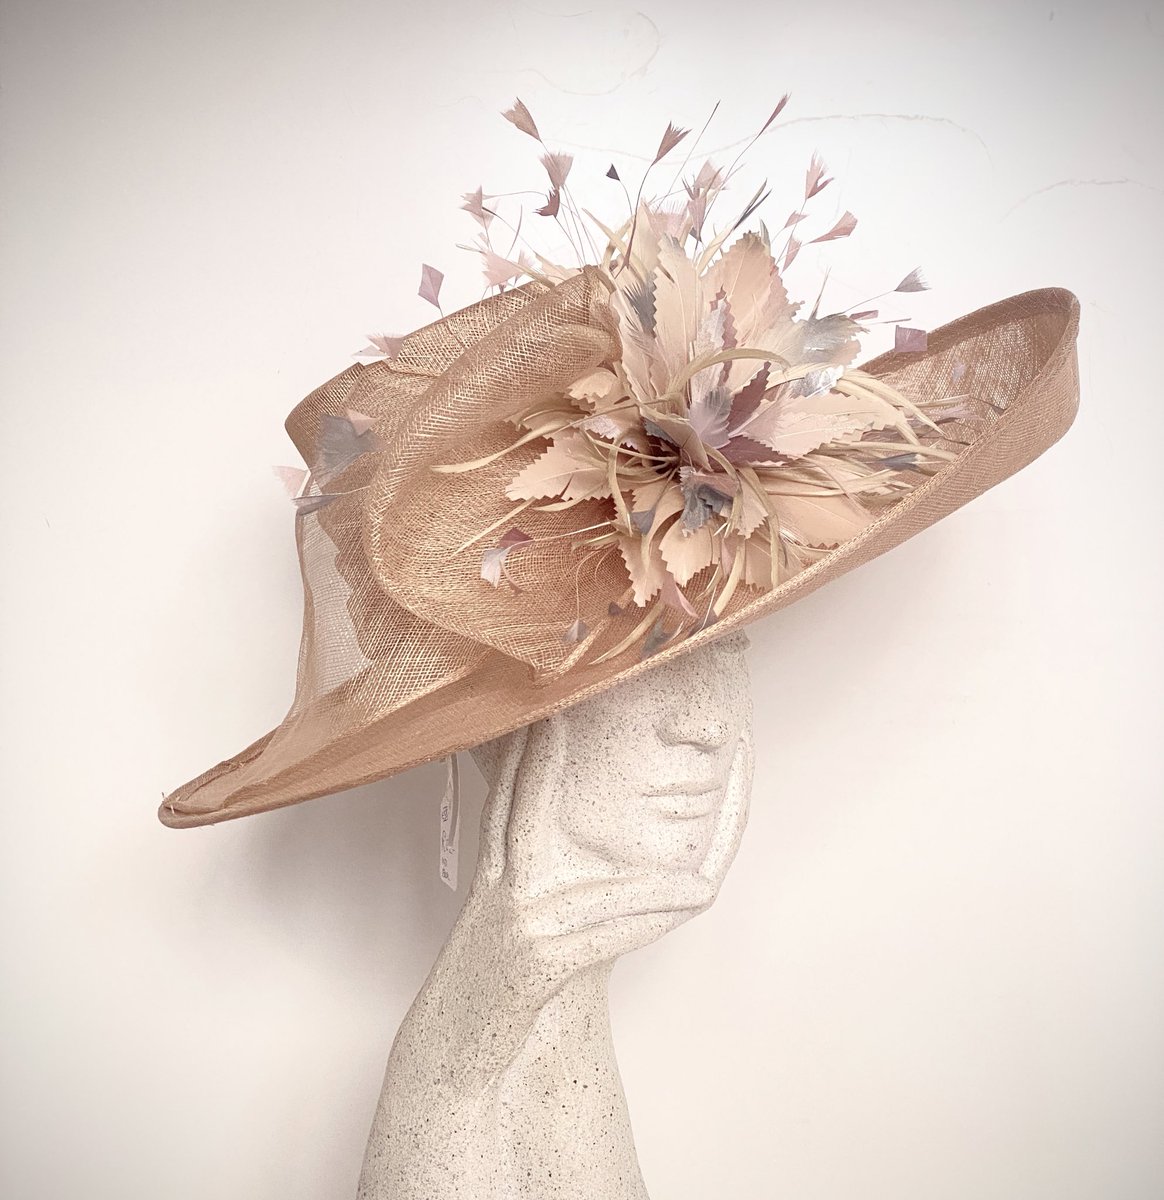 Reworked form an unwanted hat. Ready to be loved again 🤎

#hats #wedding #motherofthebride #wedding #weddingoutfit #inspo